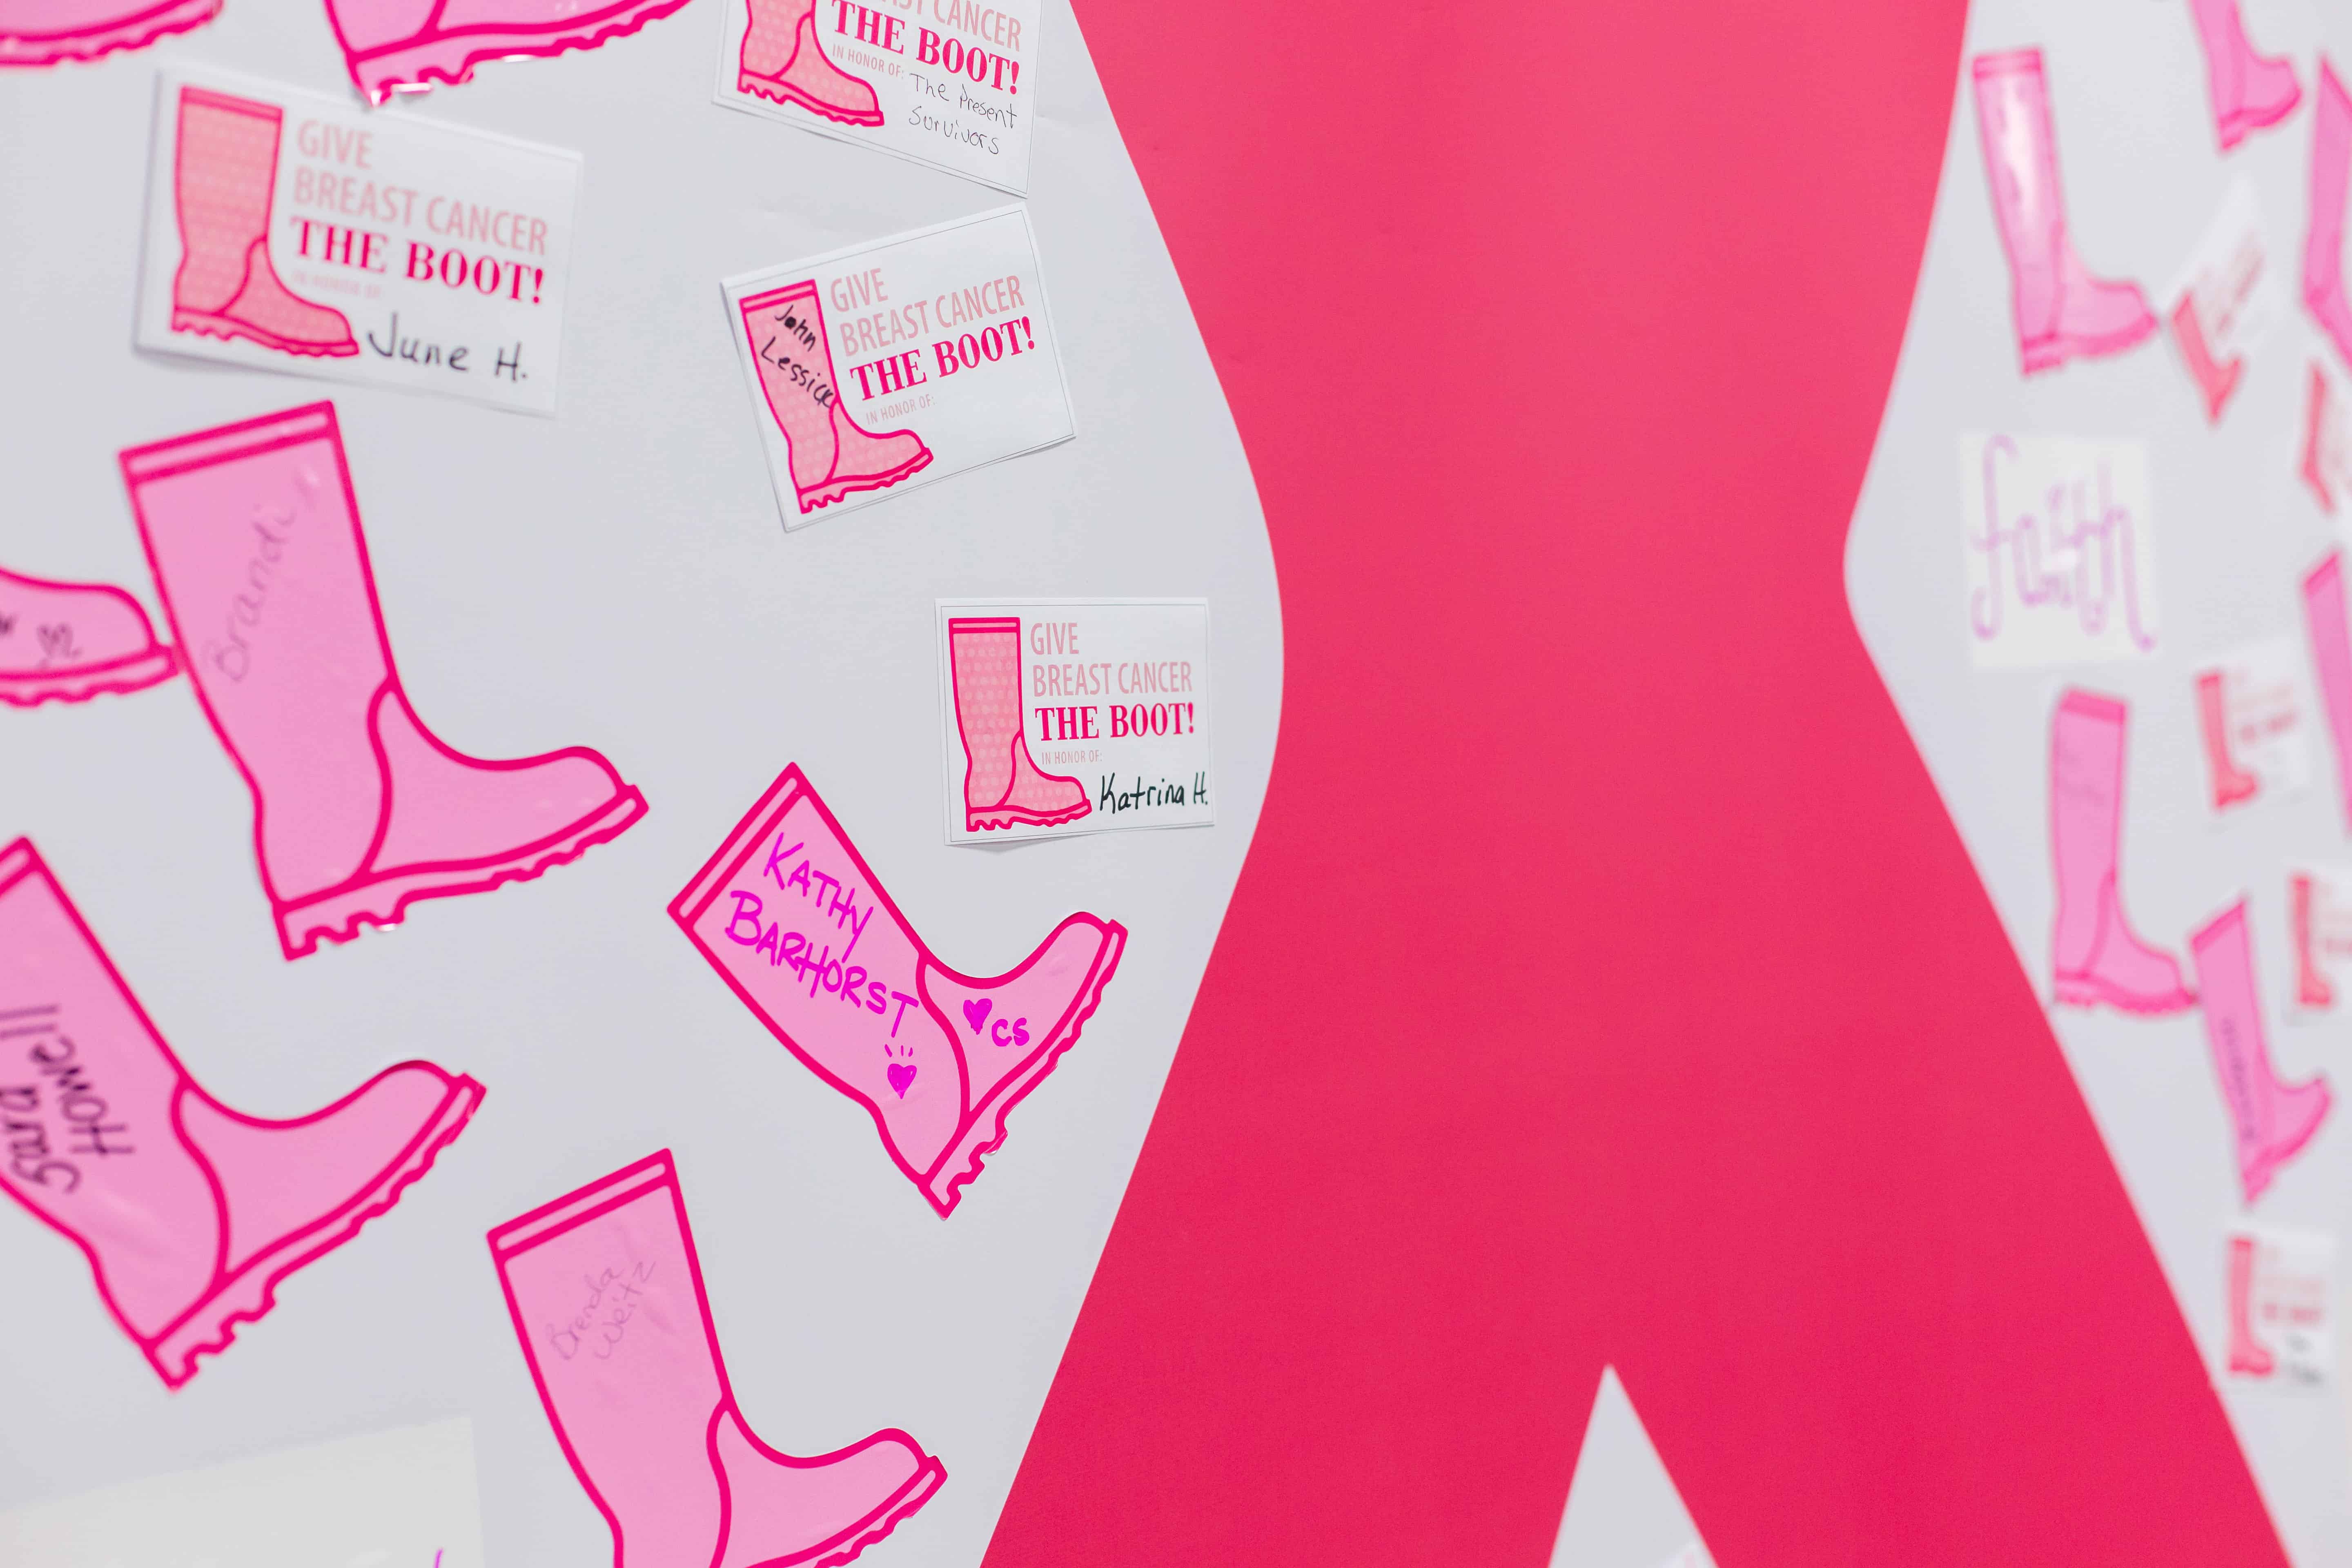 "give breast cancer the boot" banner